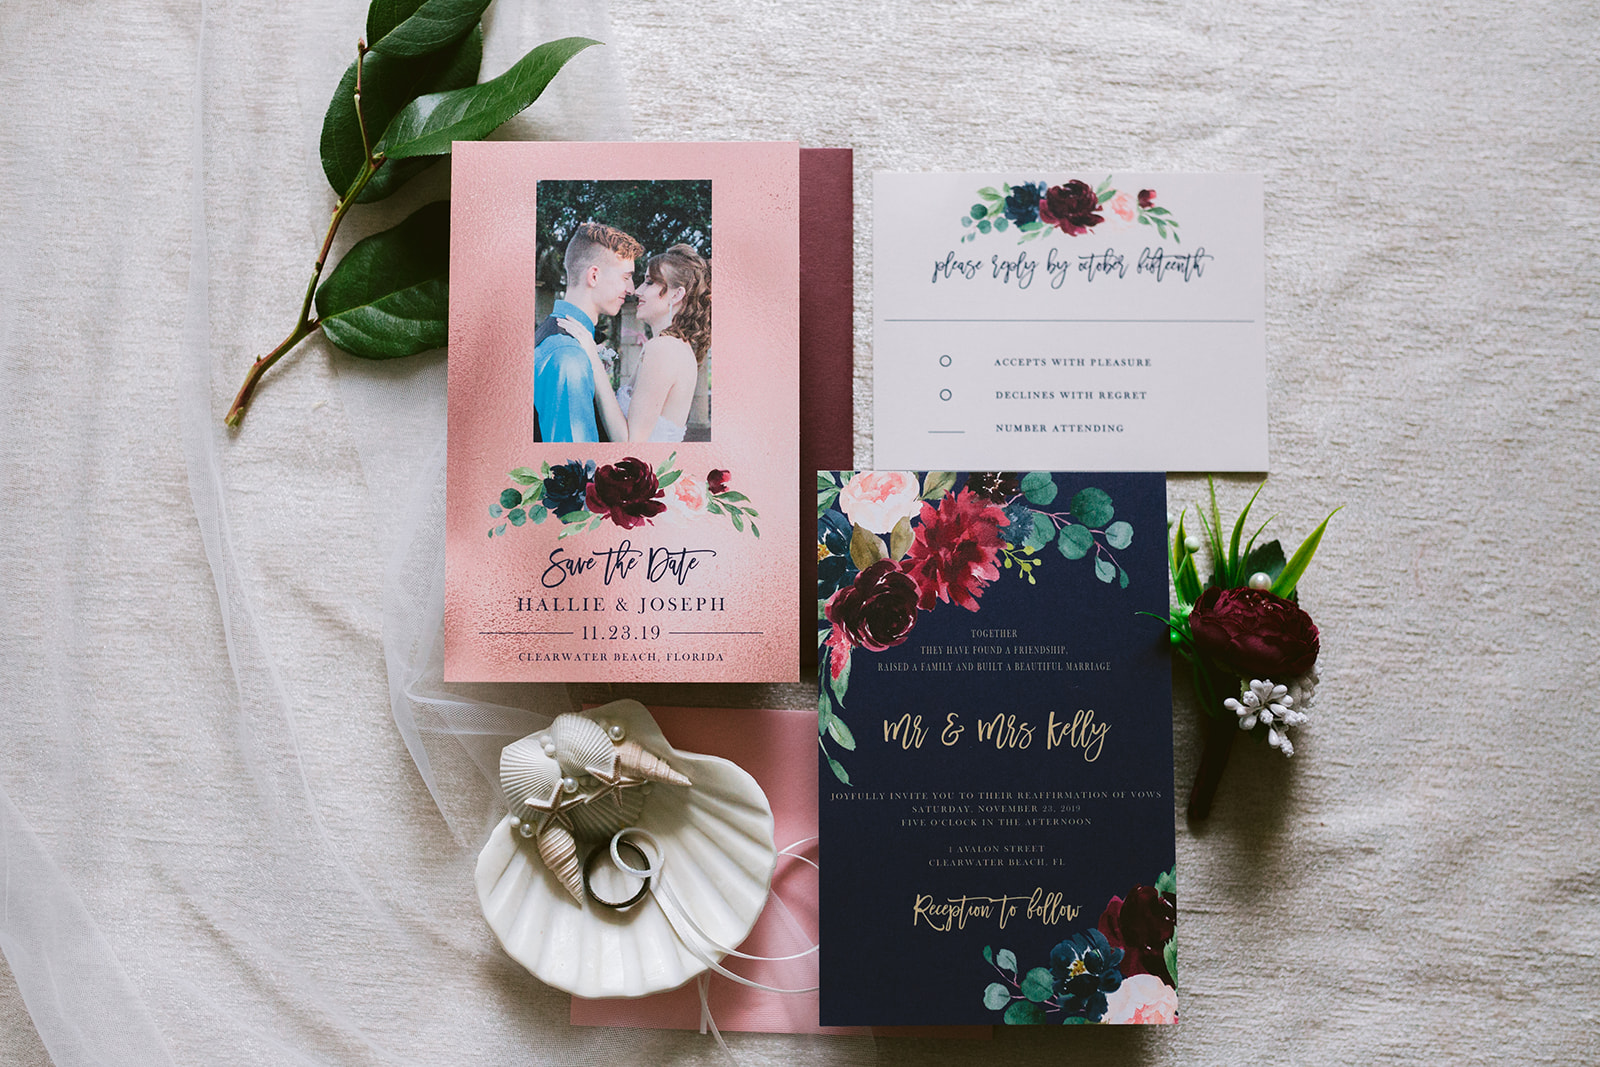 How Much Does It Cost To Get Married In Vegas. Flat-lay shot of wedding invitations and cards with floral theme.